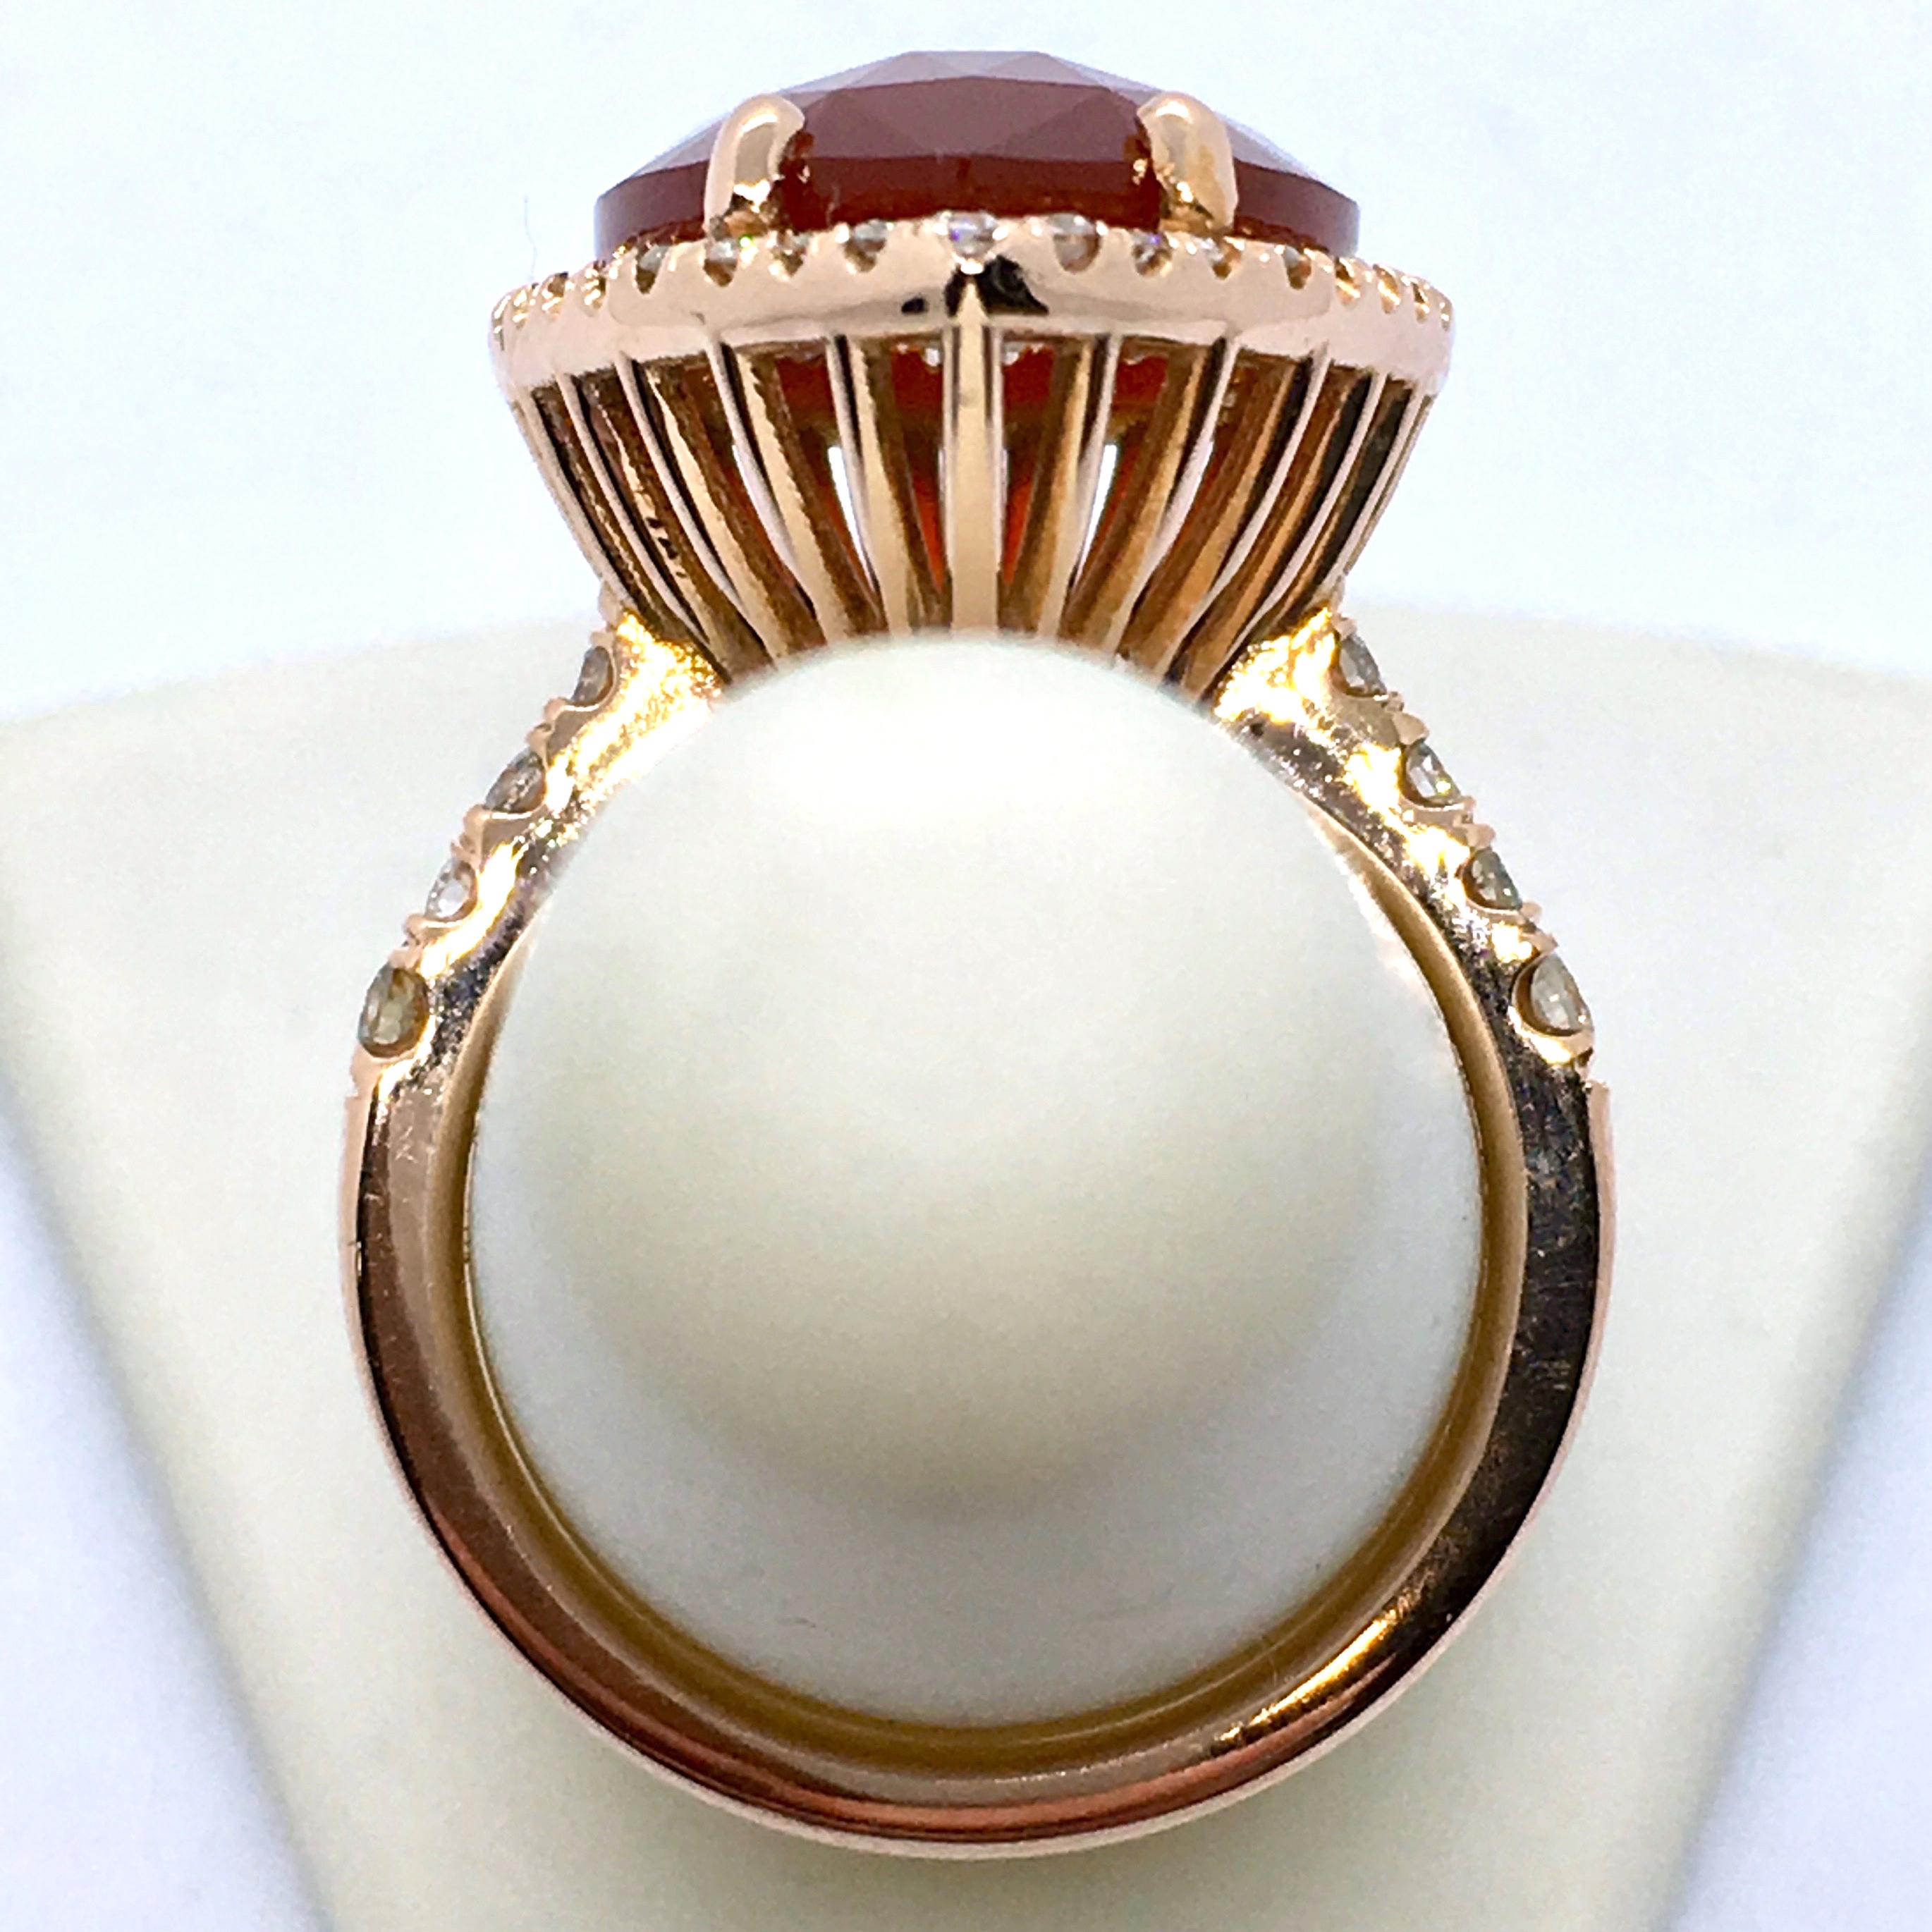 Faceted 4.0 Carat Carnelian Slice Pear-Shaped Diamond Halo Ring in Rose Gold 5